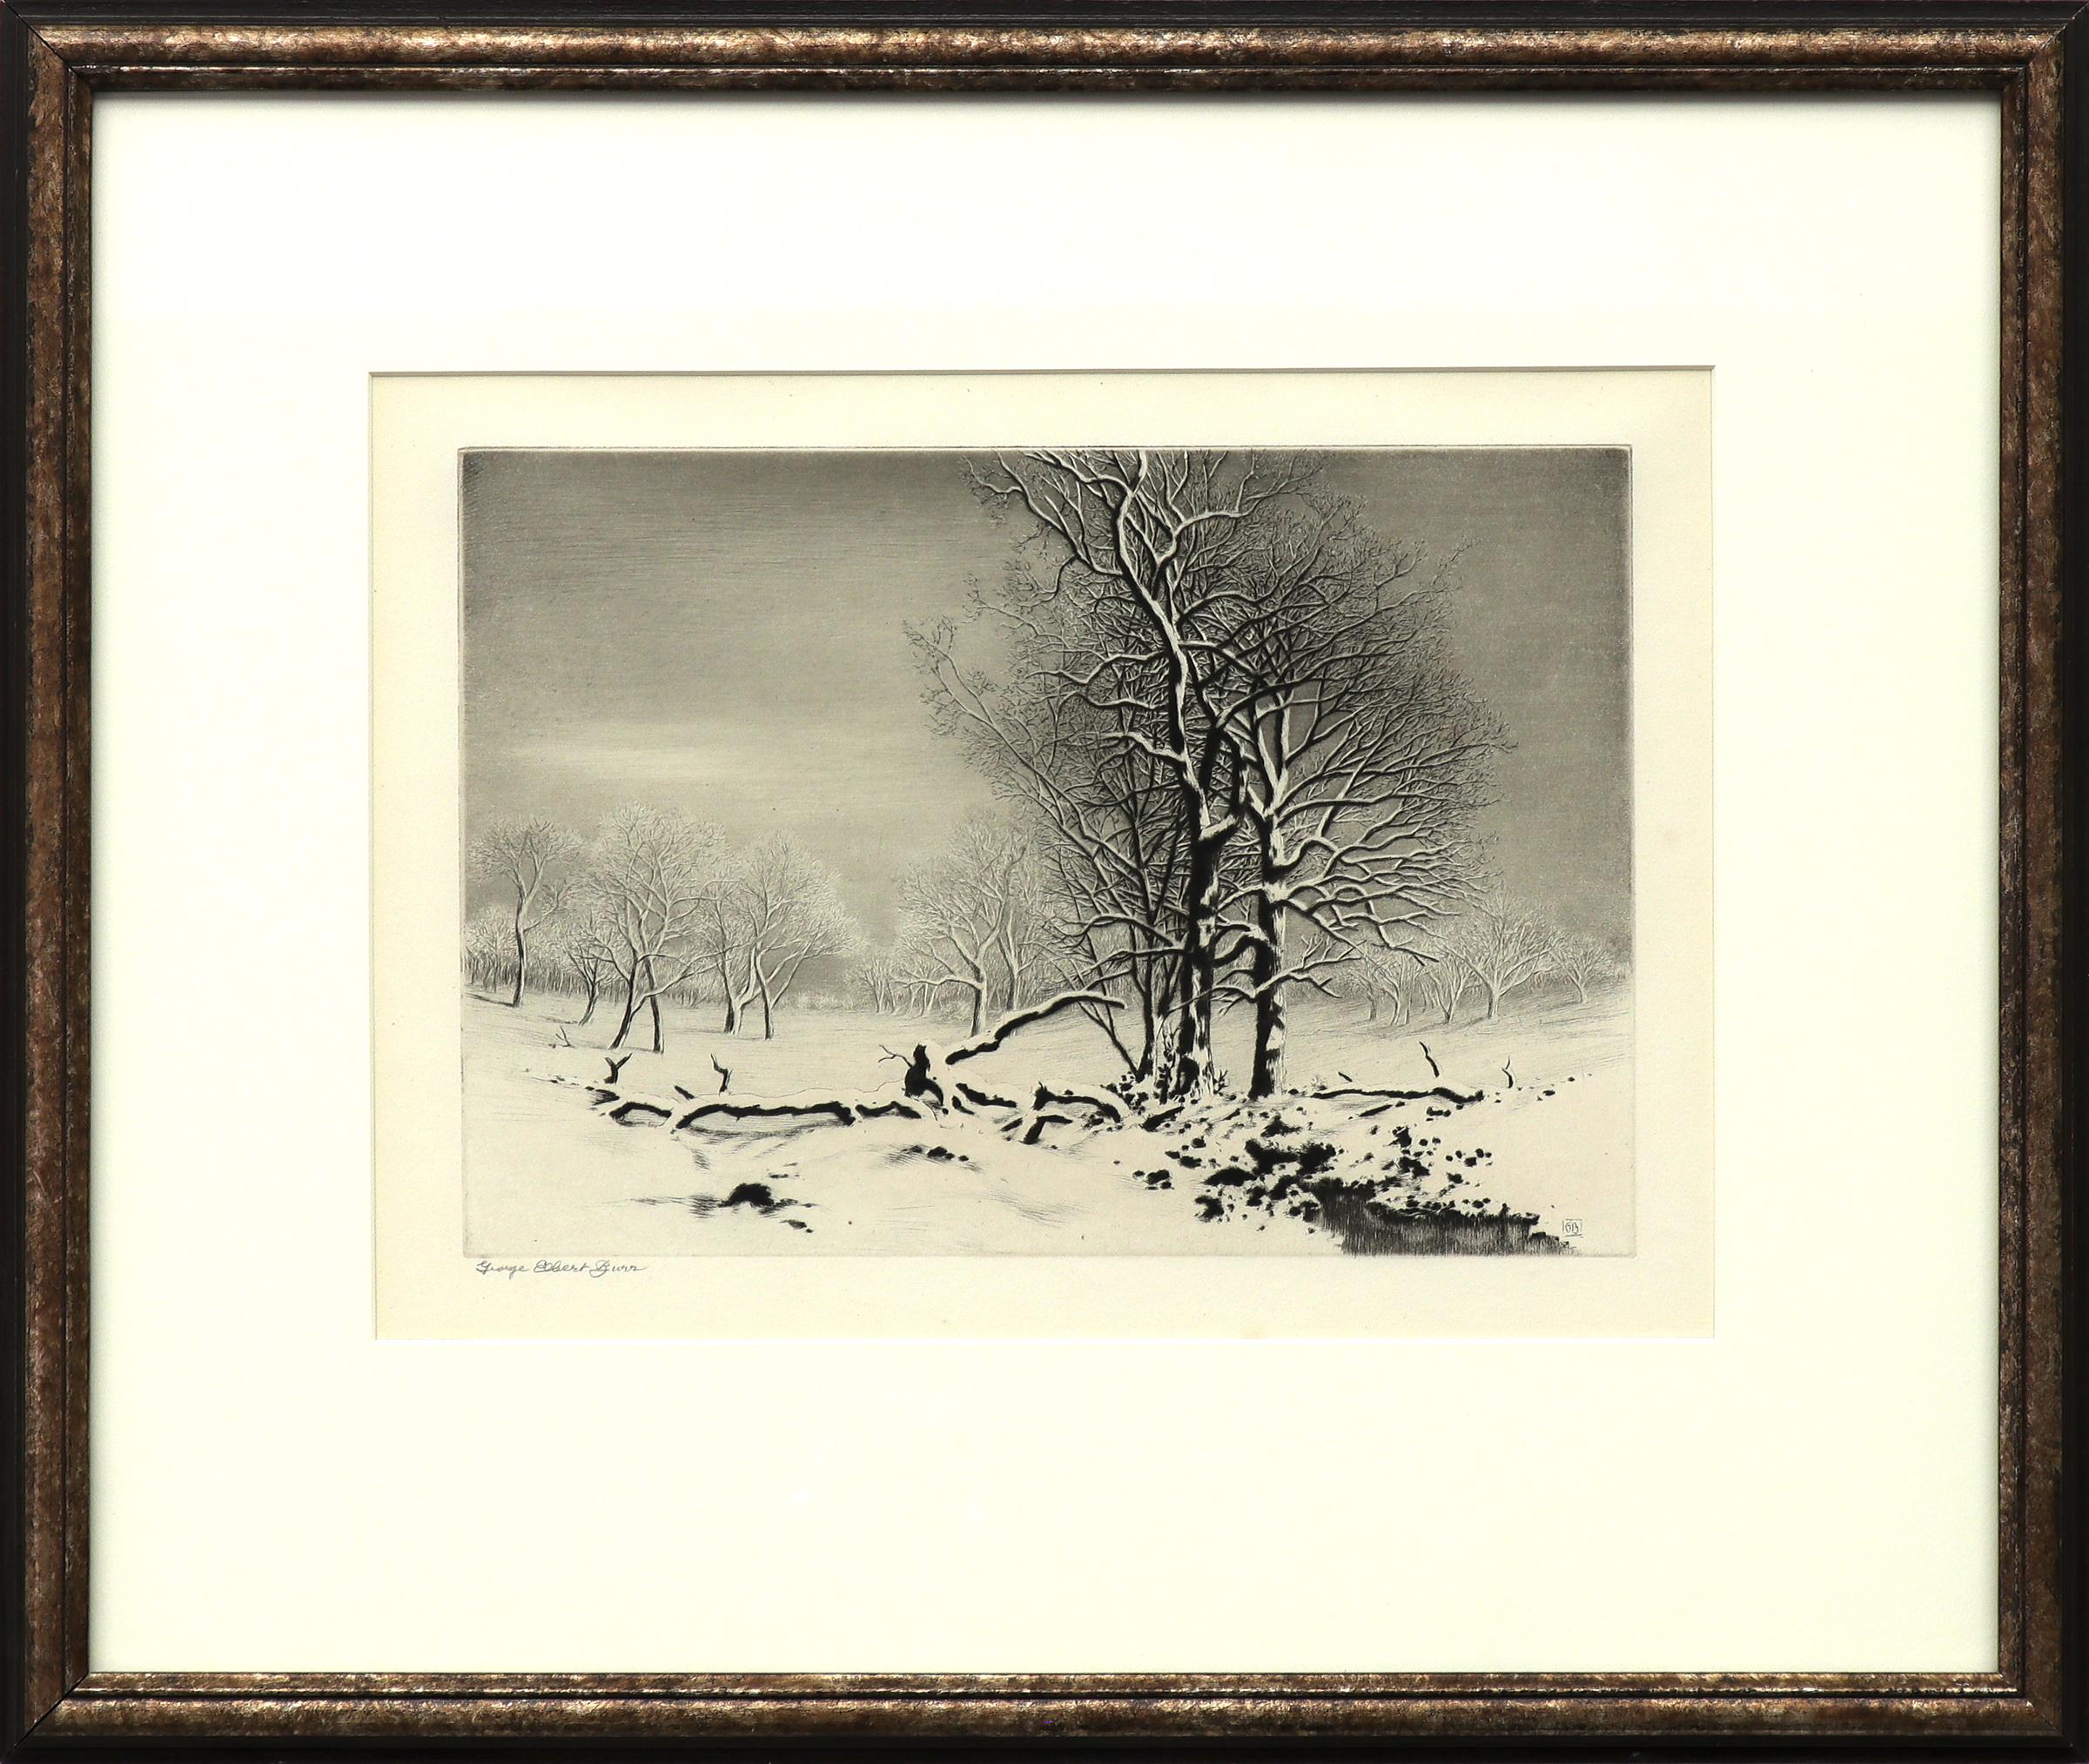 Original Signed Lithograph Print of a Winter Landscape with Snow and Trees